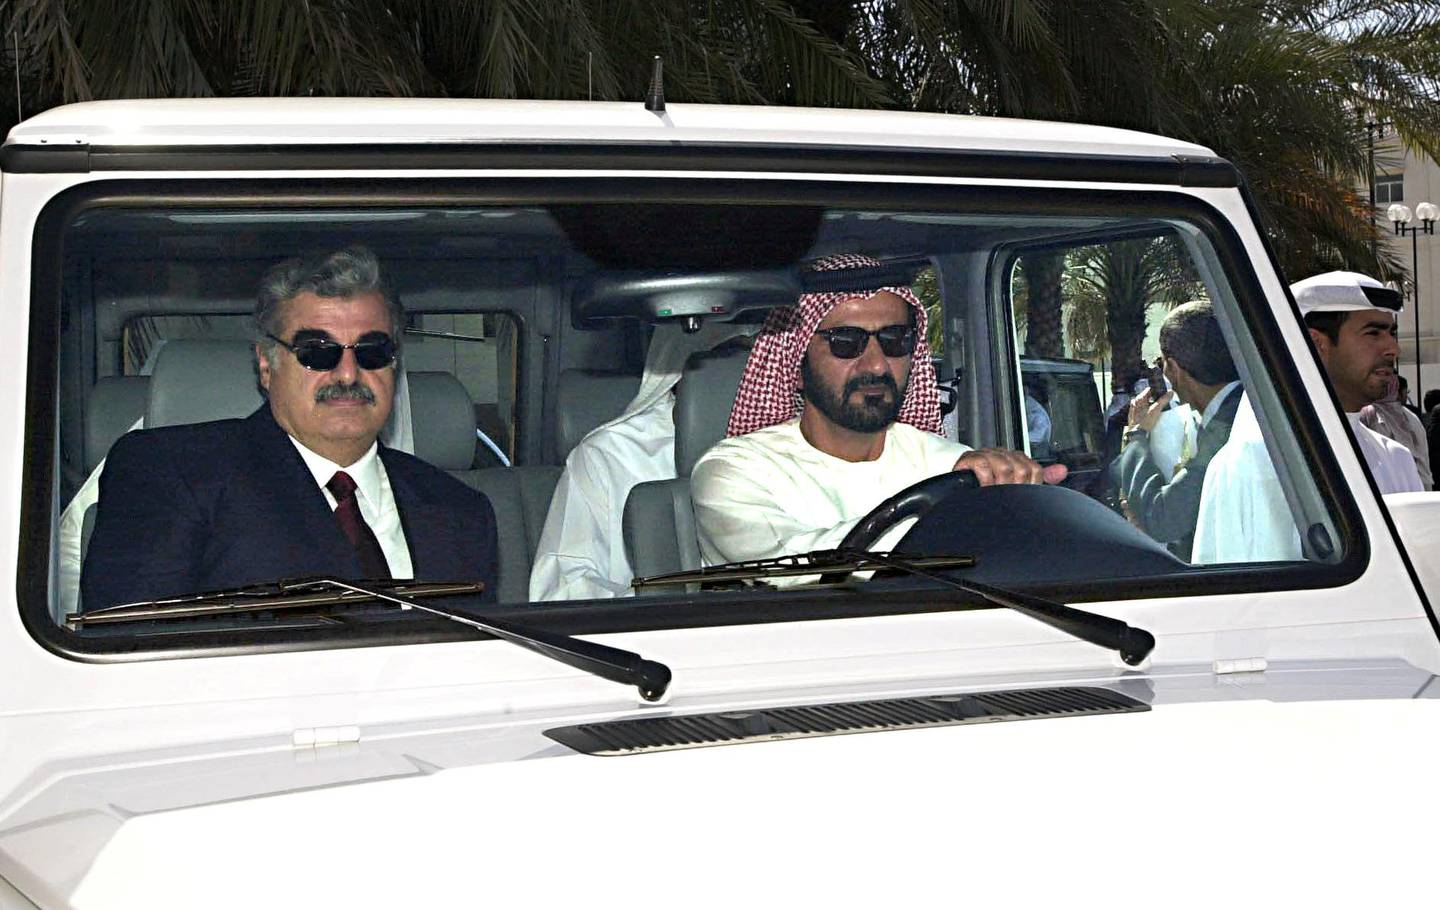 Crown Prince of Dubai Mohammed bin Rashed al Maktoum (R) drives former Lebanese Premier and head of the Lebanese parliamentary opposition Rafic Hariri in Dubai 06 March 2000. Hariri is on a two-day visit to the Emirate. (Photo by AYMAN TARAWI / HARIRI FOUNDATION / AFP)